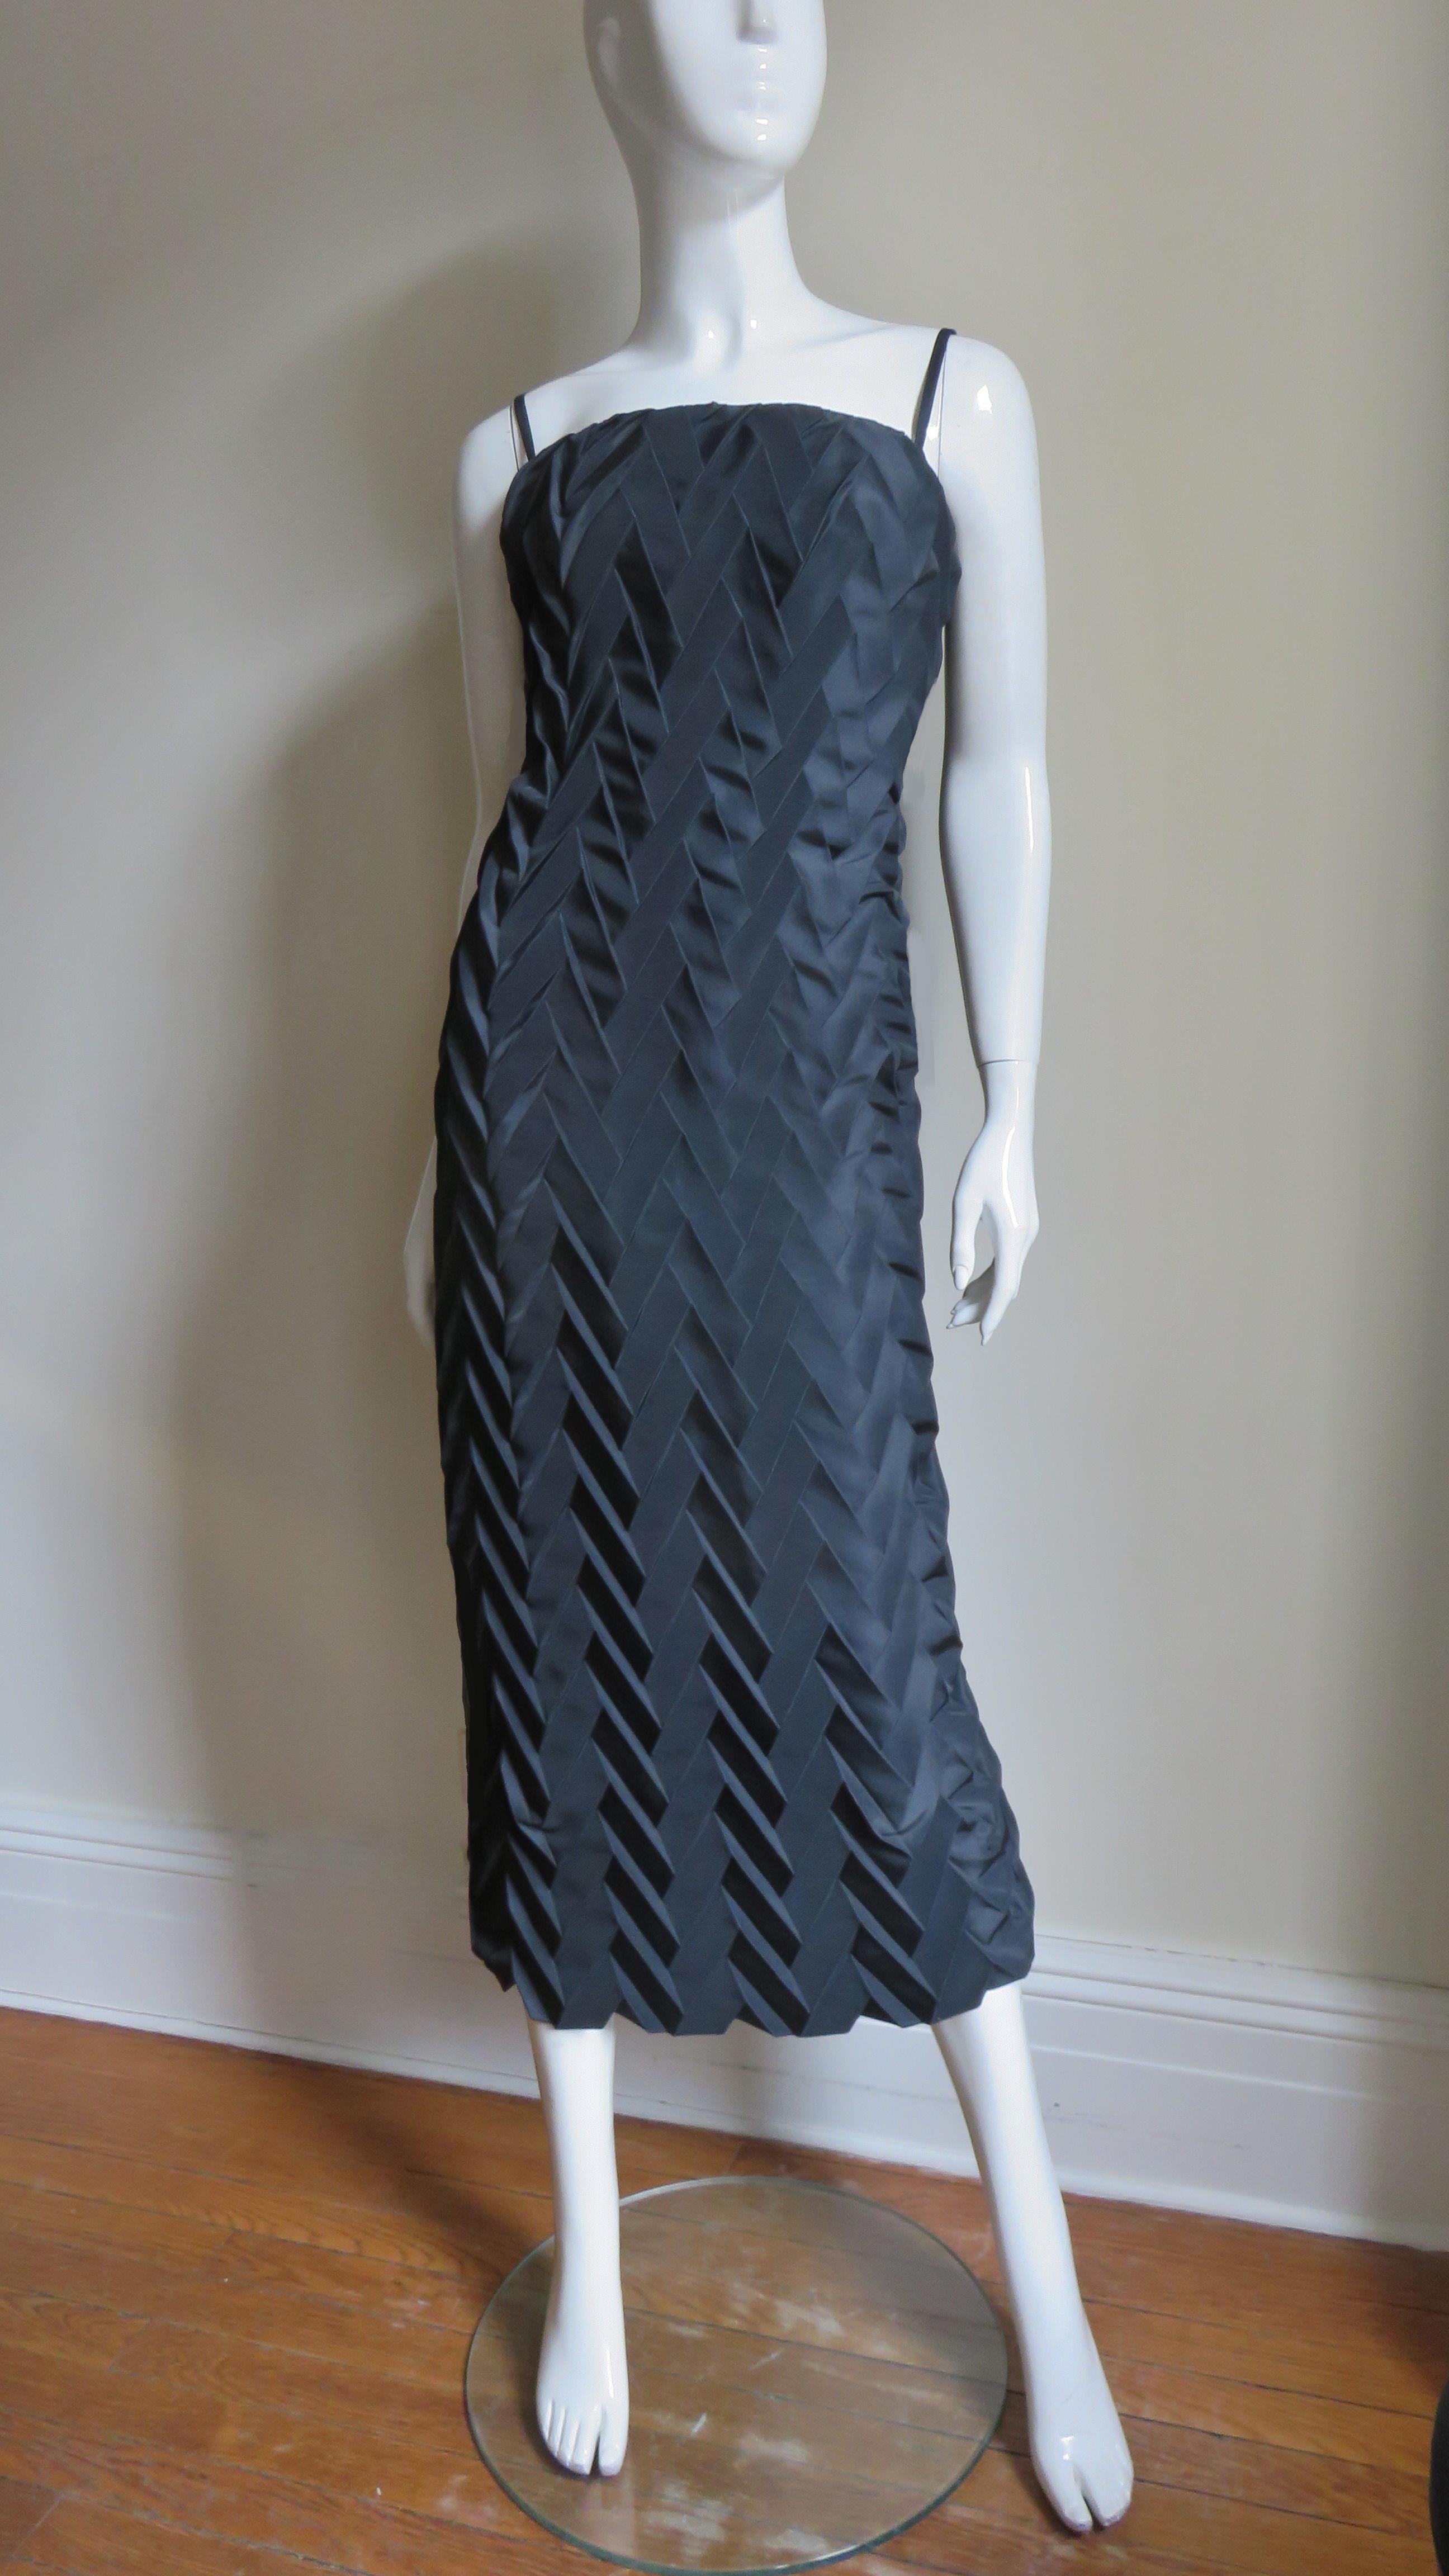 A fabulous black silk dress from Hanae Mori.  It is simply cut with spaghetti straps and an intricately  chevron pleated body.  It has an invisible side zipper and is silk lined. 
Fits sizes Small, Medium. Marked French size 42.

Bust  34-36